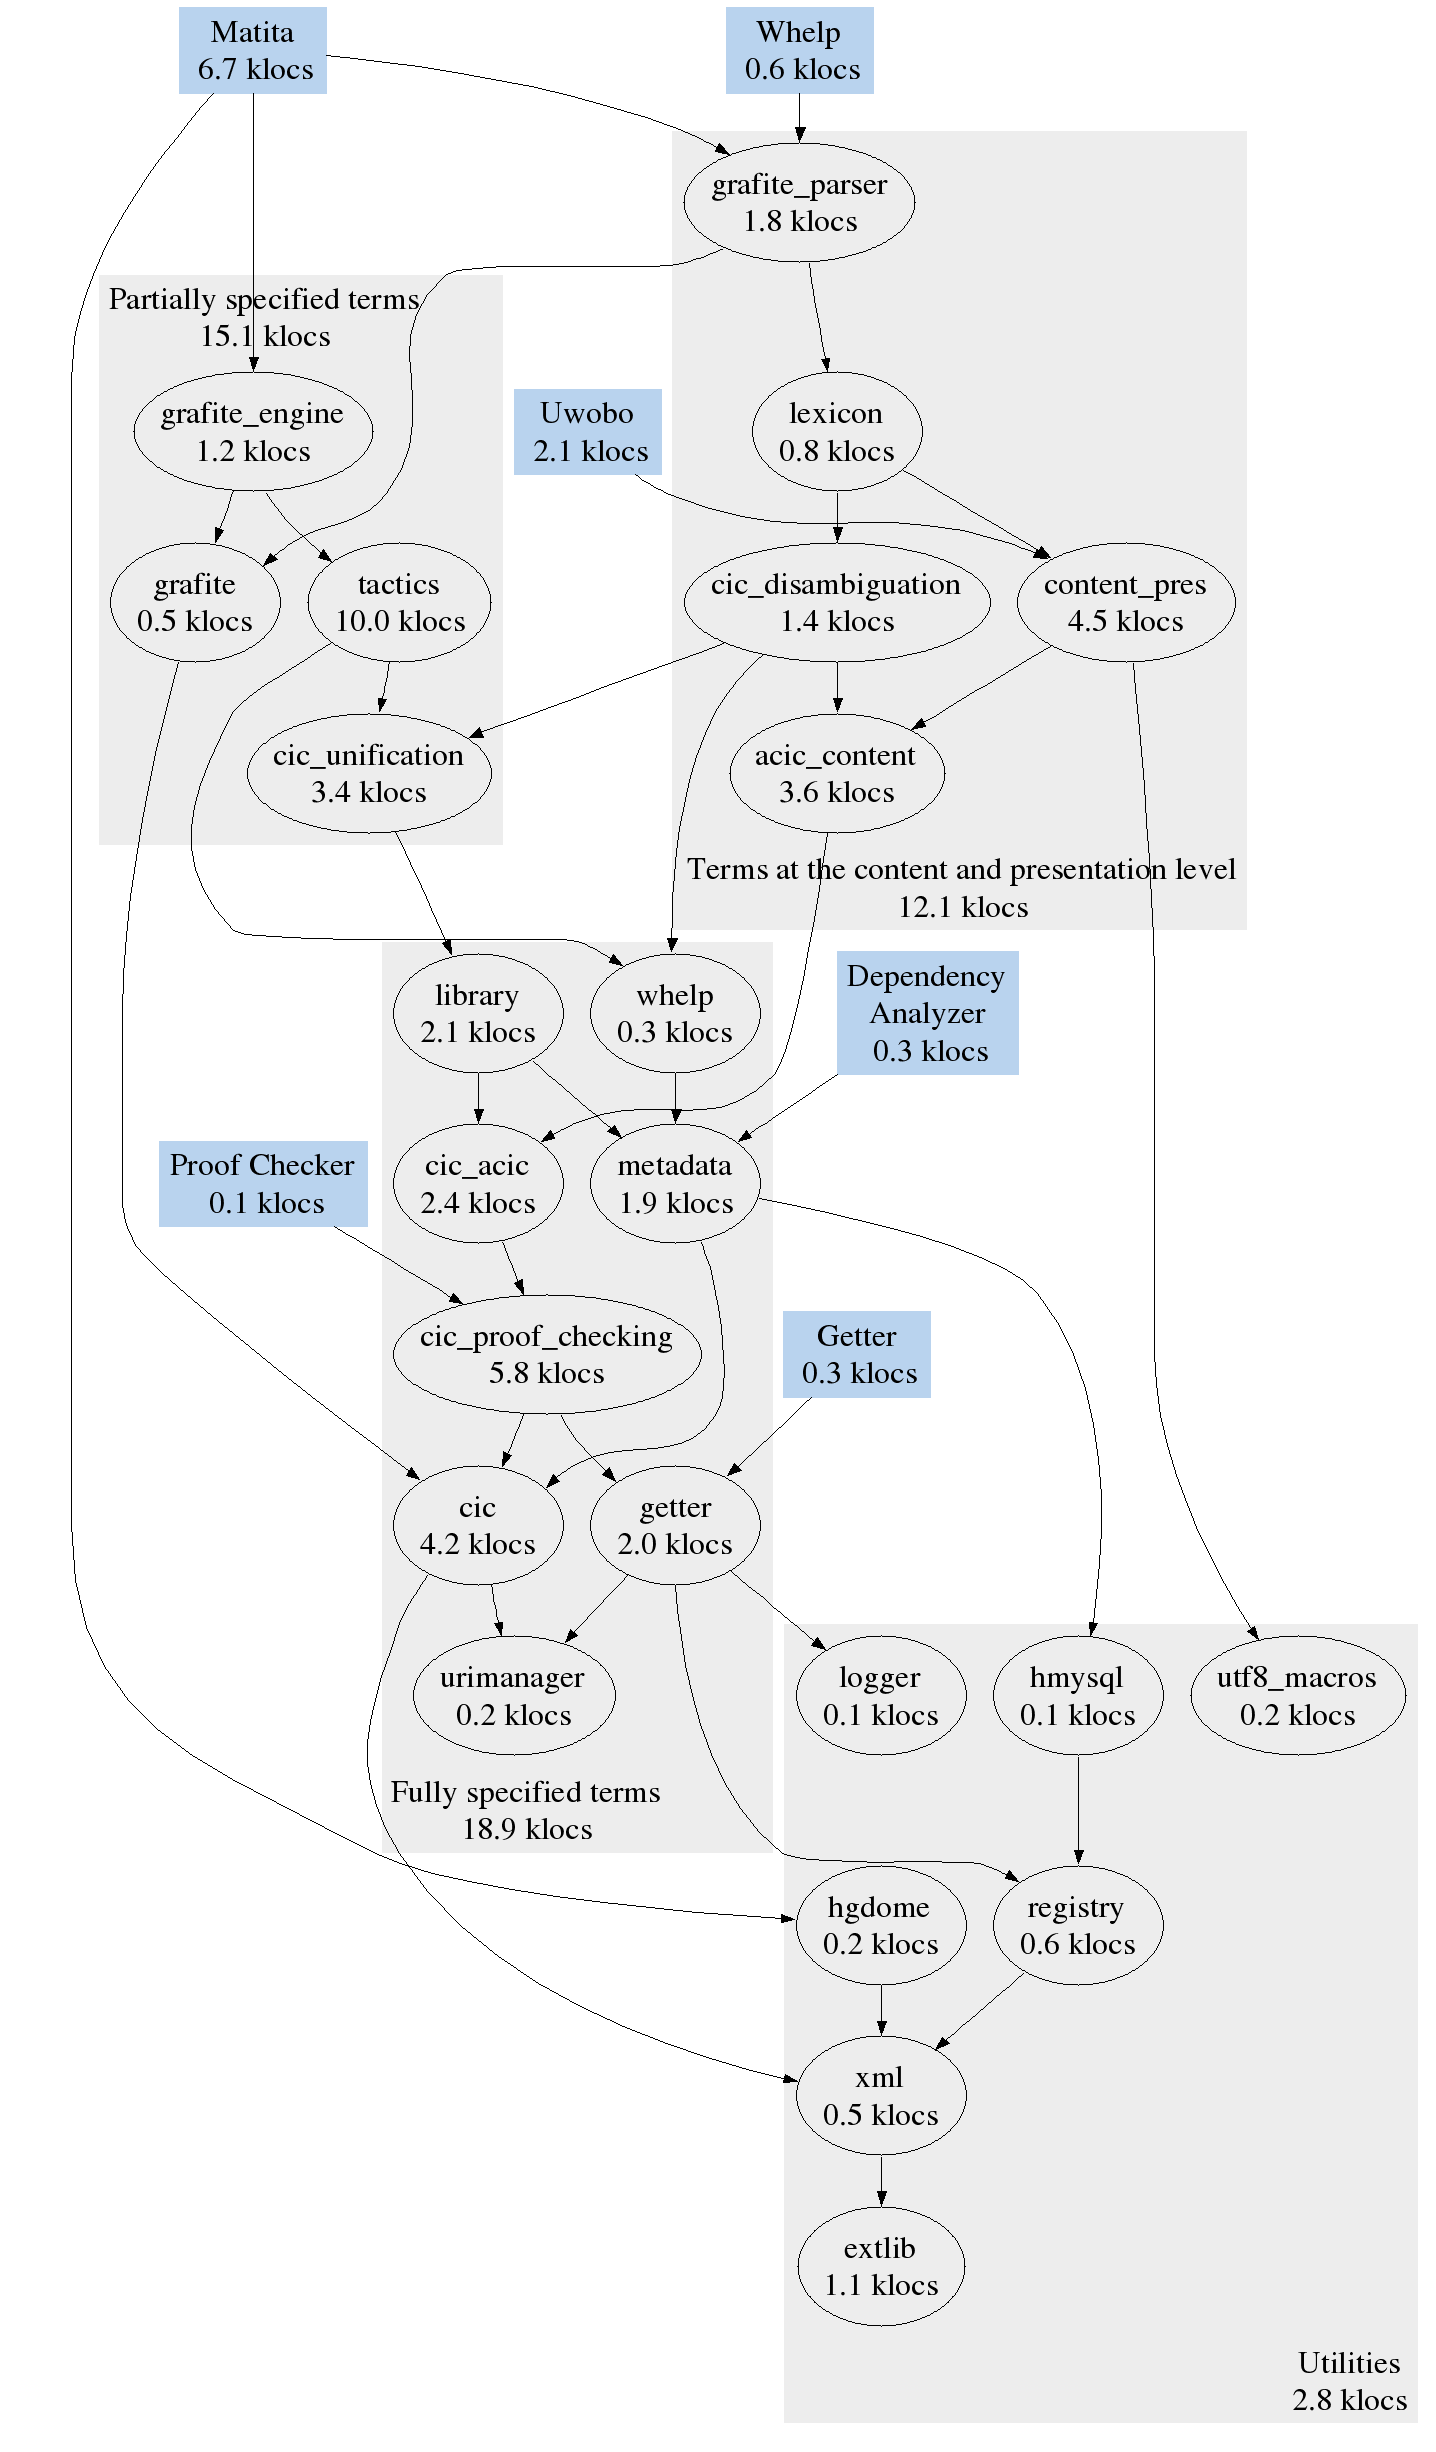 helm/papers/matita/libraries-clusters.png